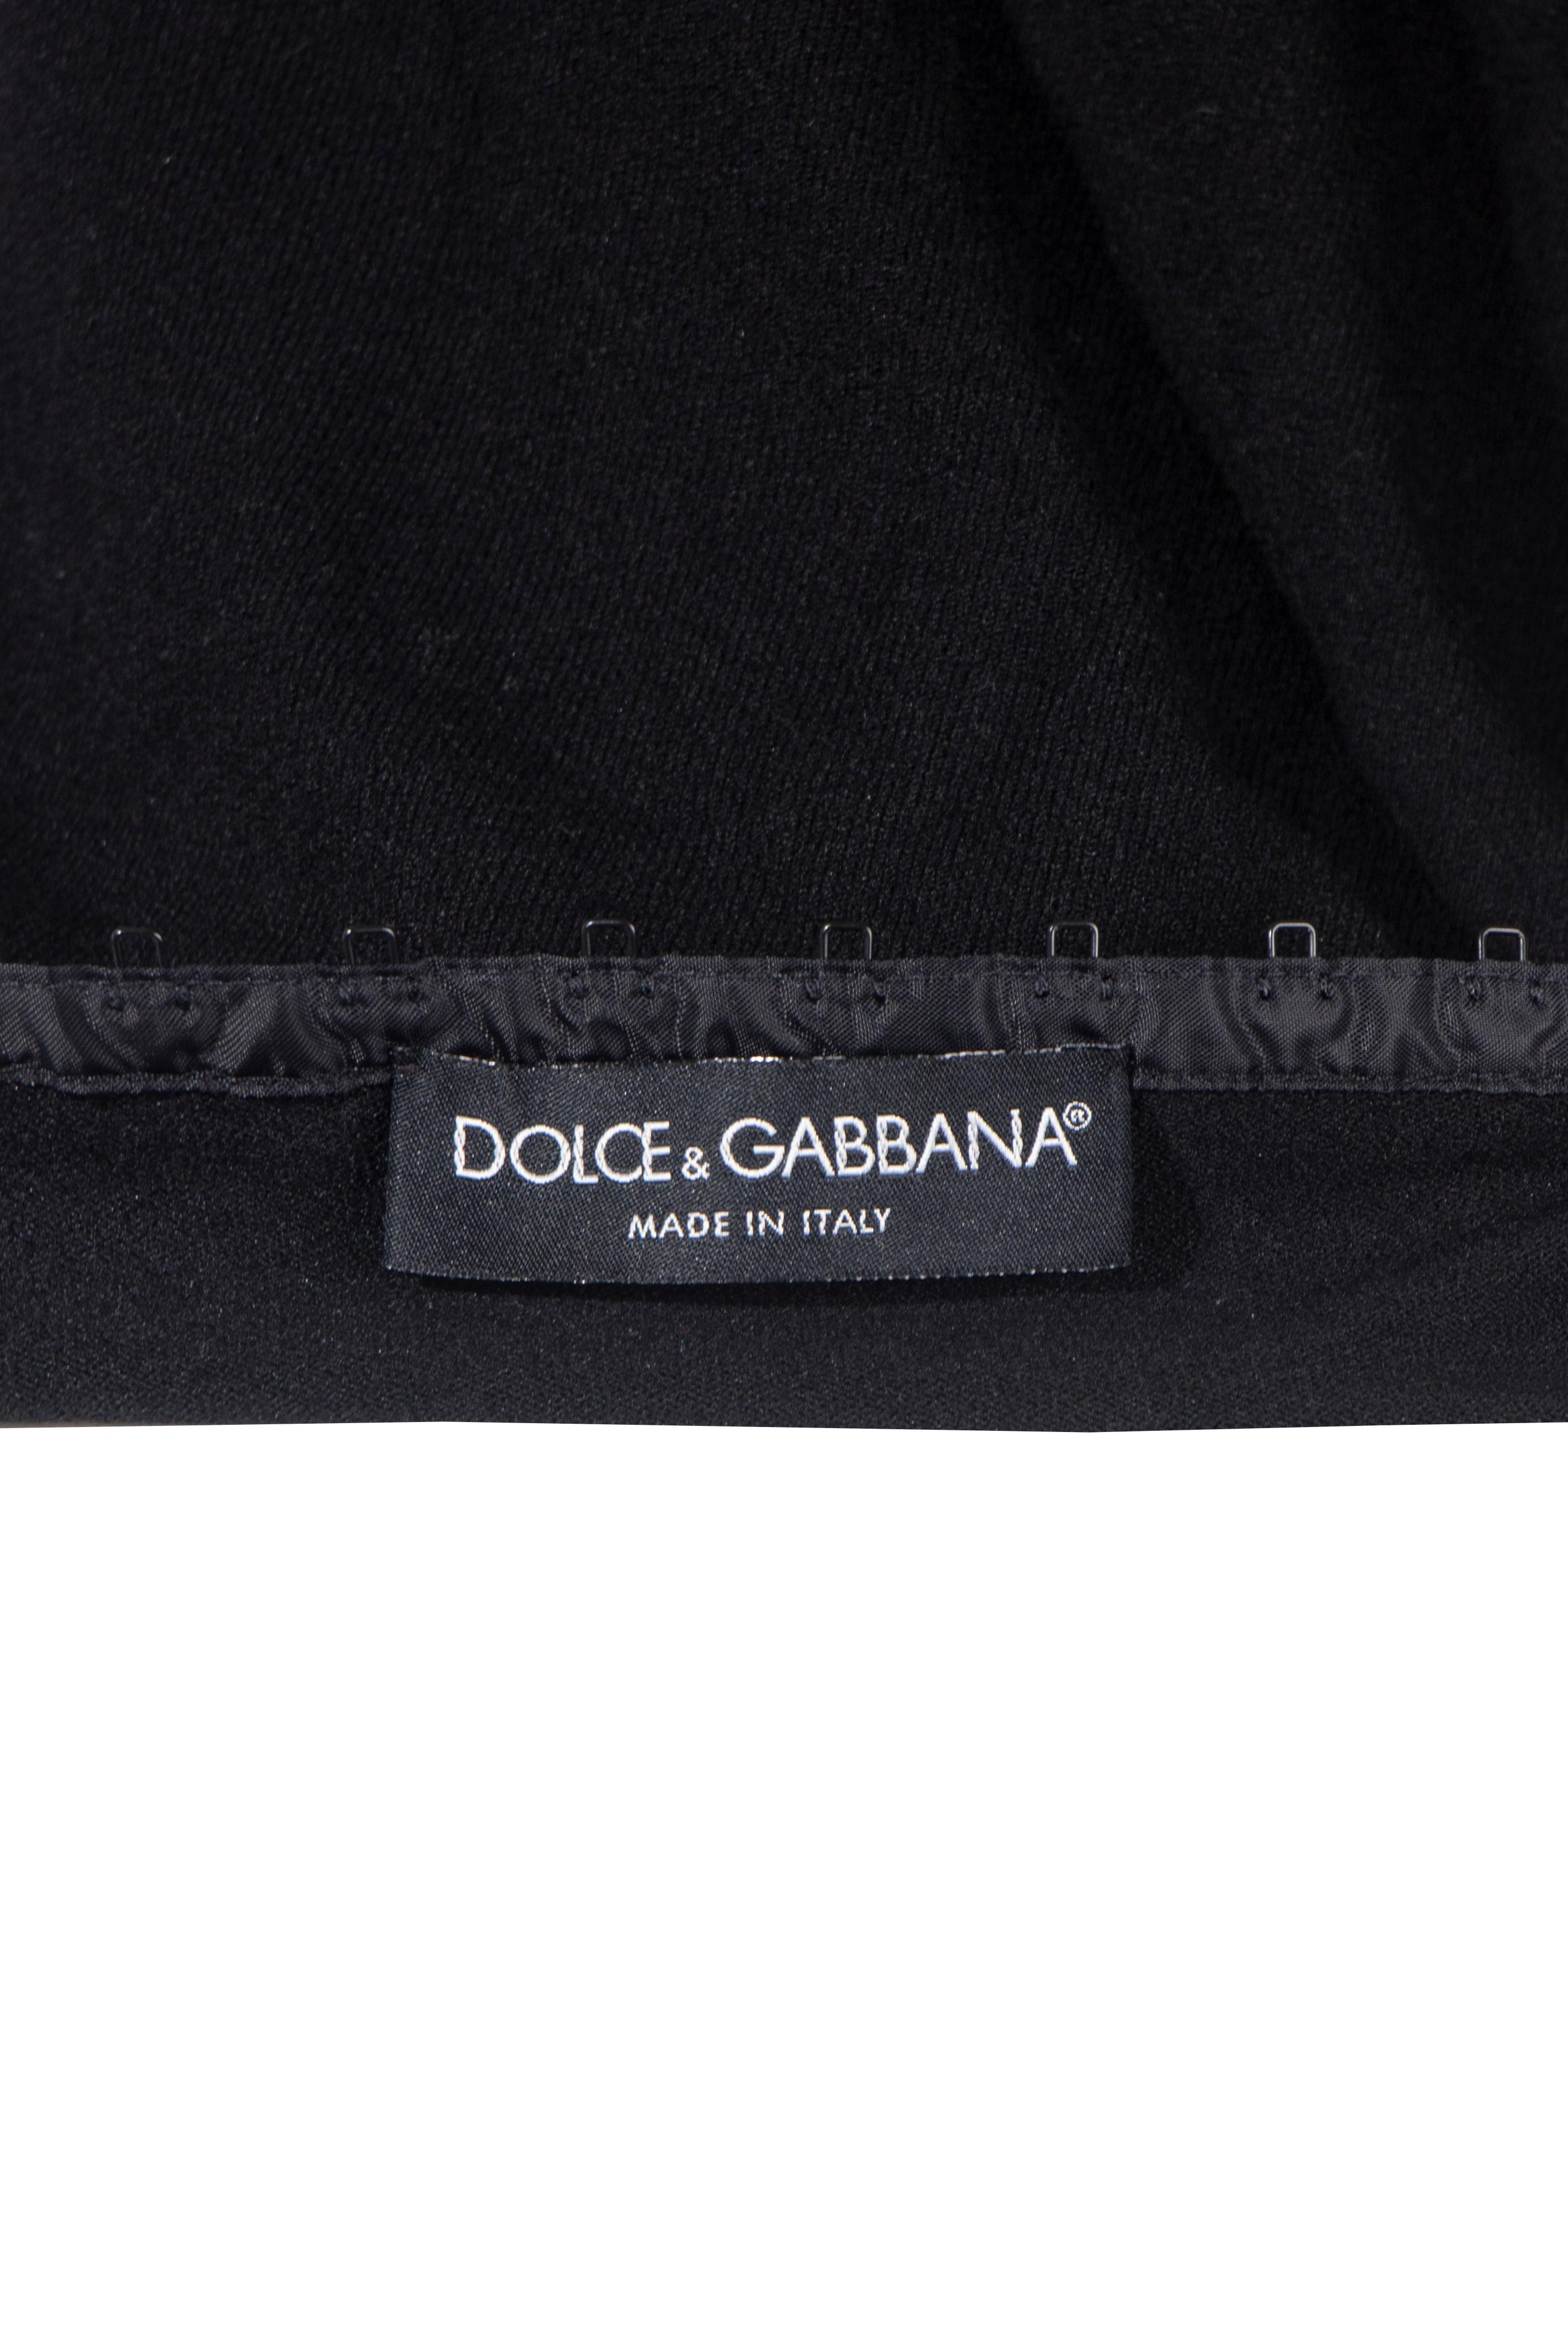 Dolce & Gabbana black lace up top, fw 2003 For Sale 7